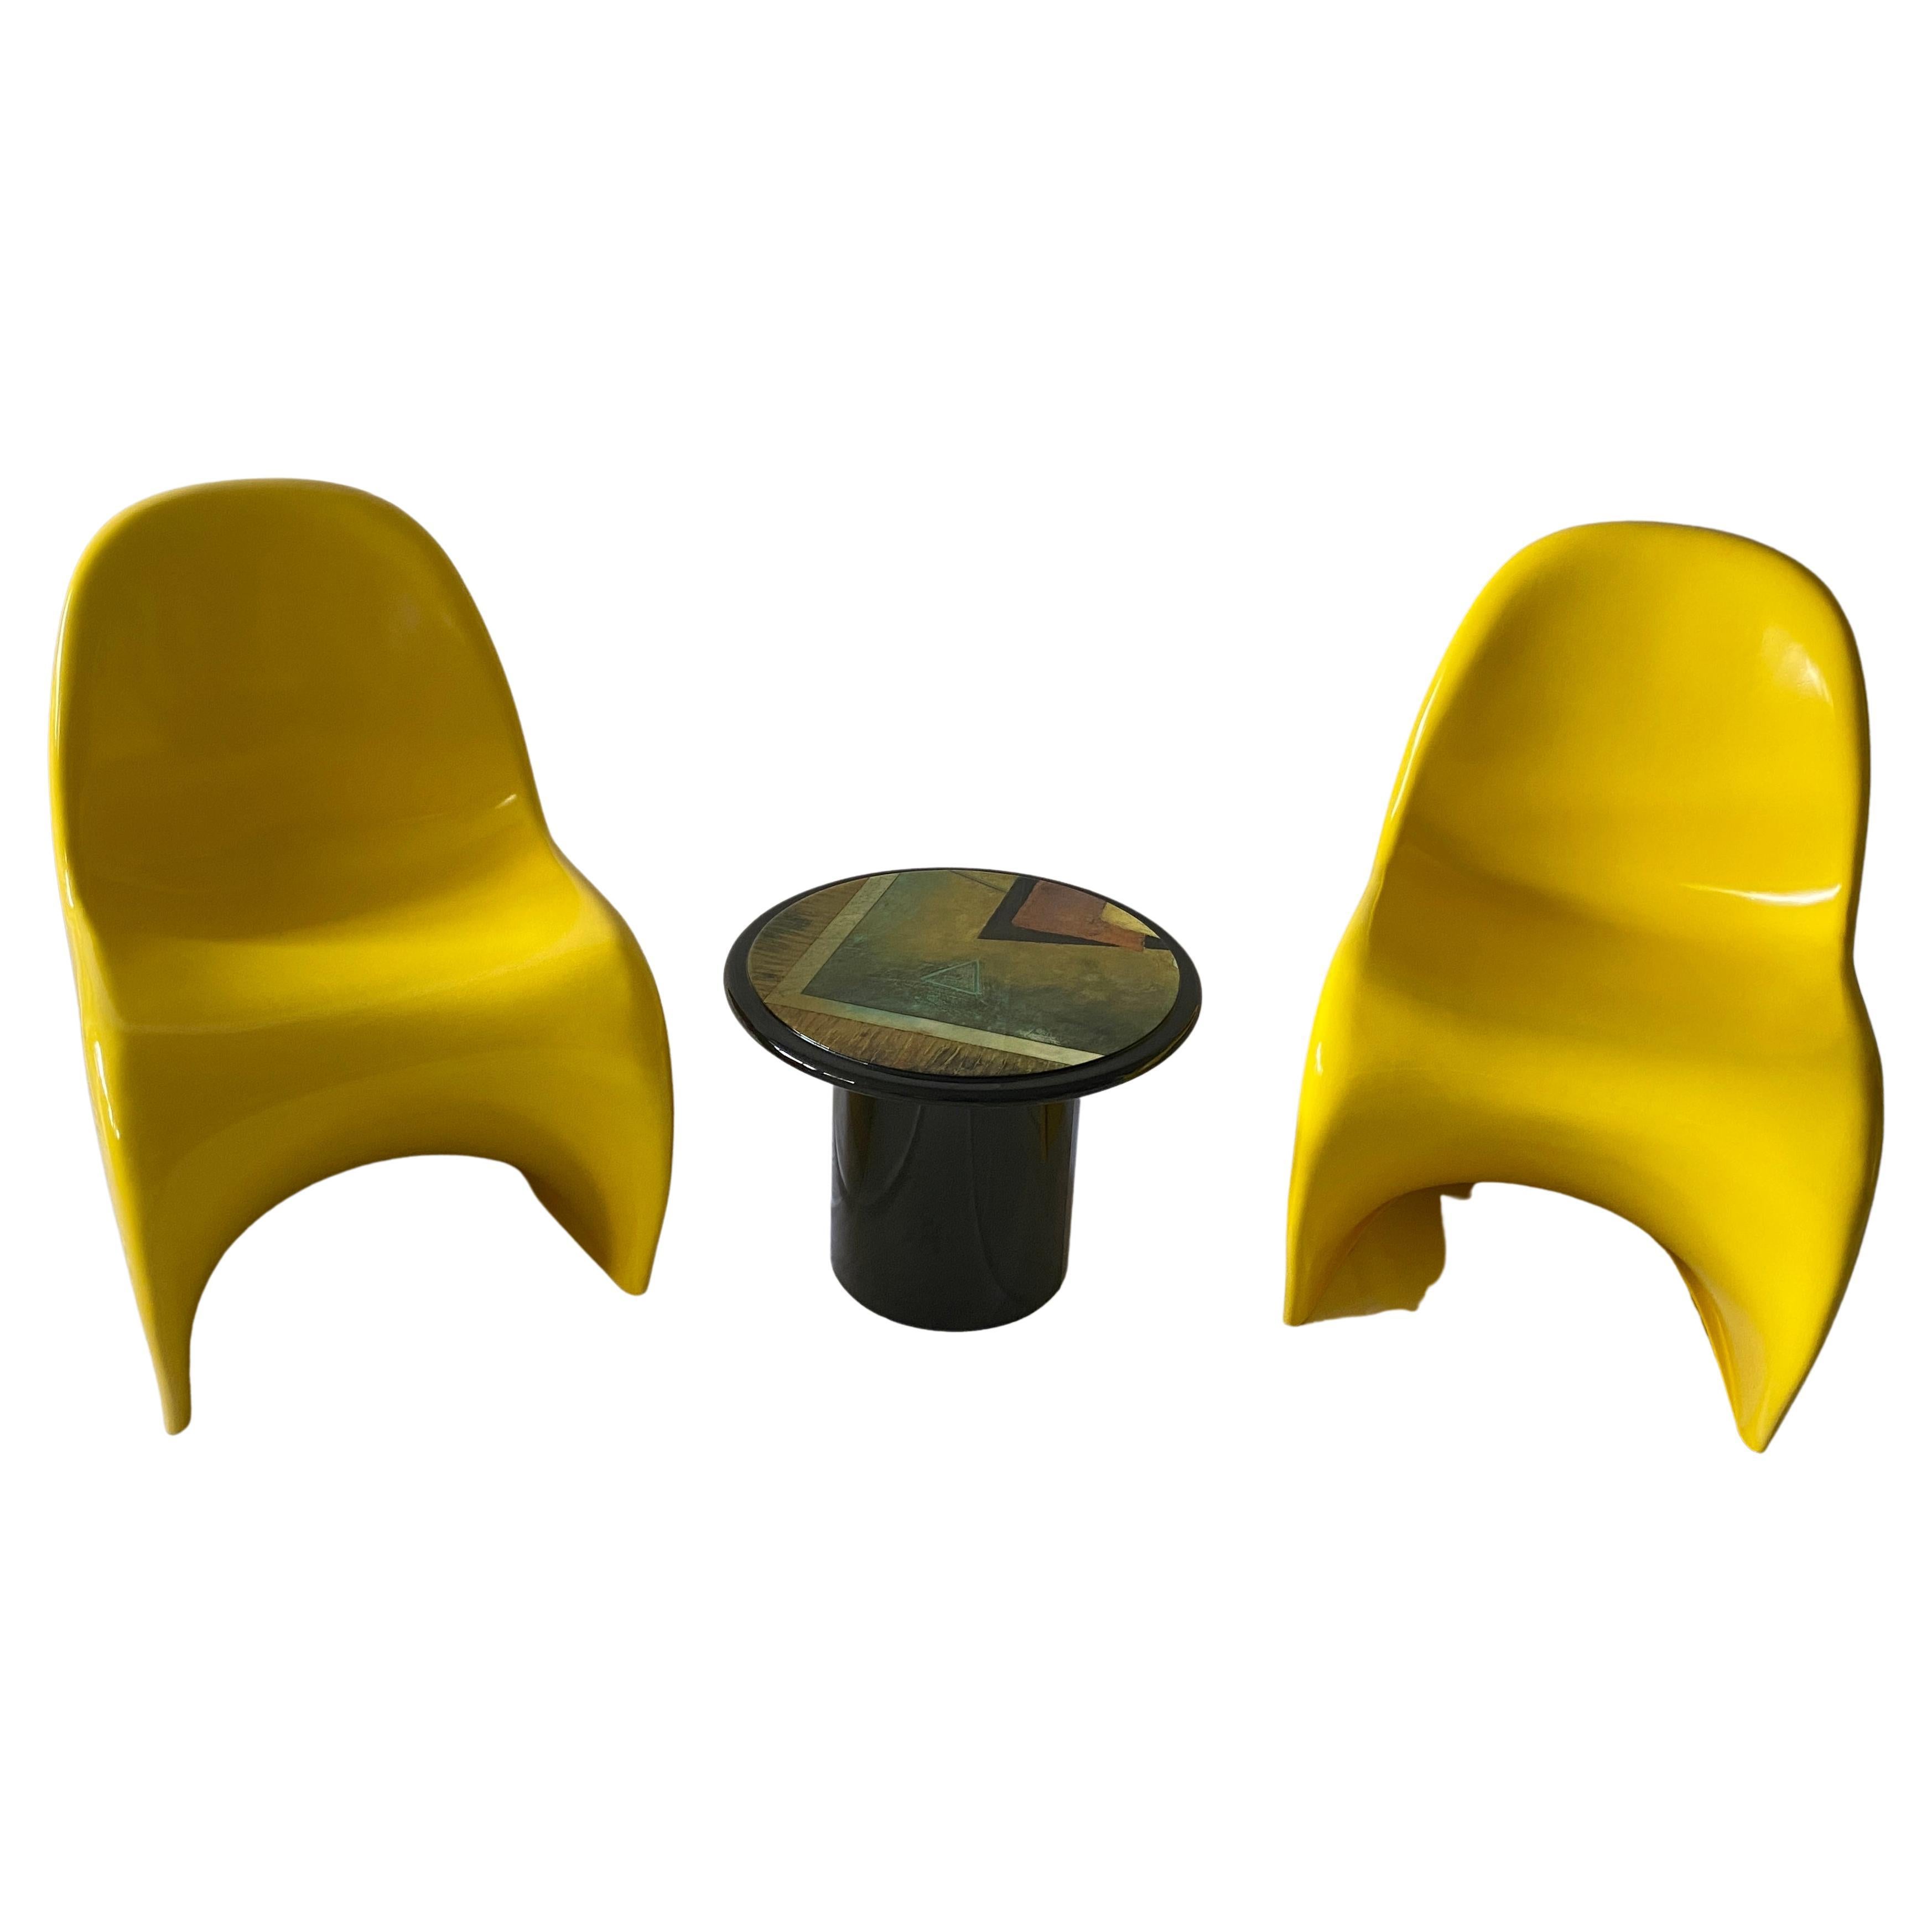 Timeless cantilevered side chairs designed by Verner Panton in 1959. High-quality design made of fiberglass. Unique, retouched condition. 

Our pair of Panton cantilevered chairs are a stunning golden yellow, original color was blue, see detailed